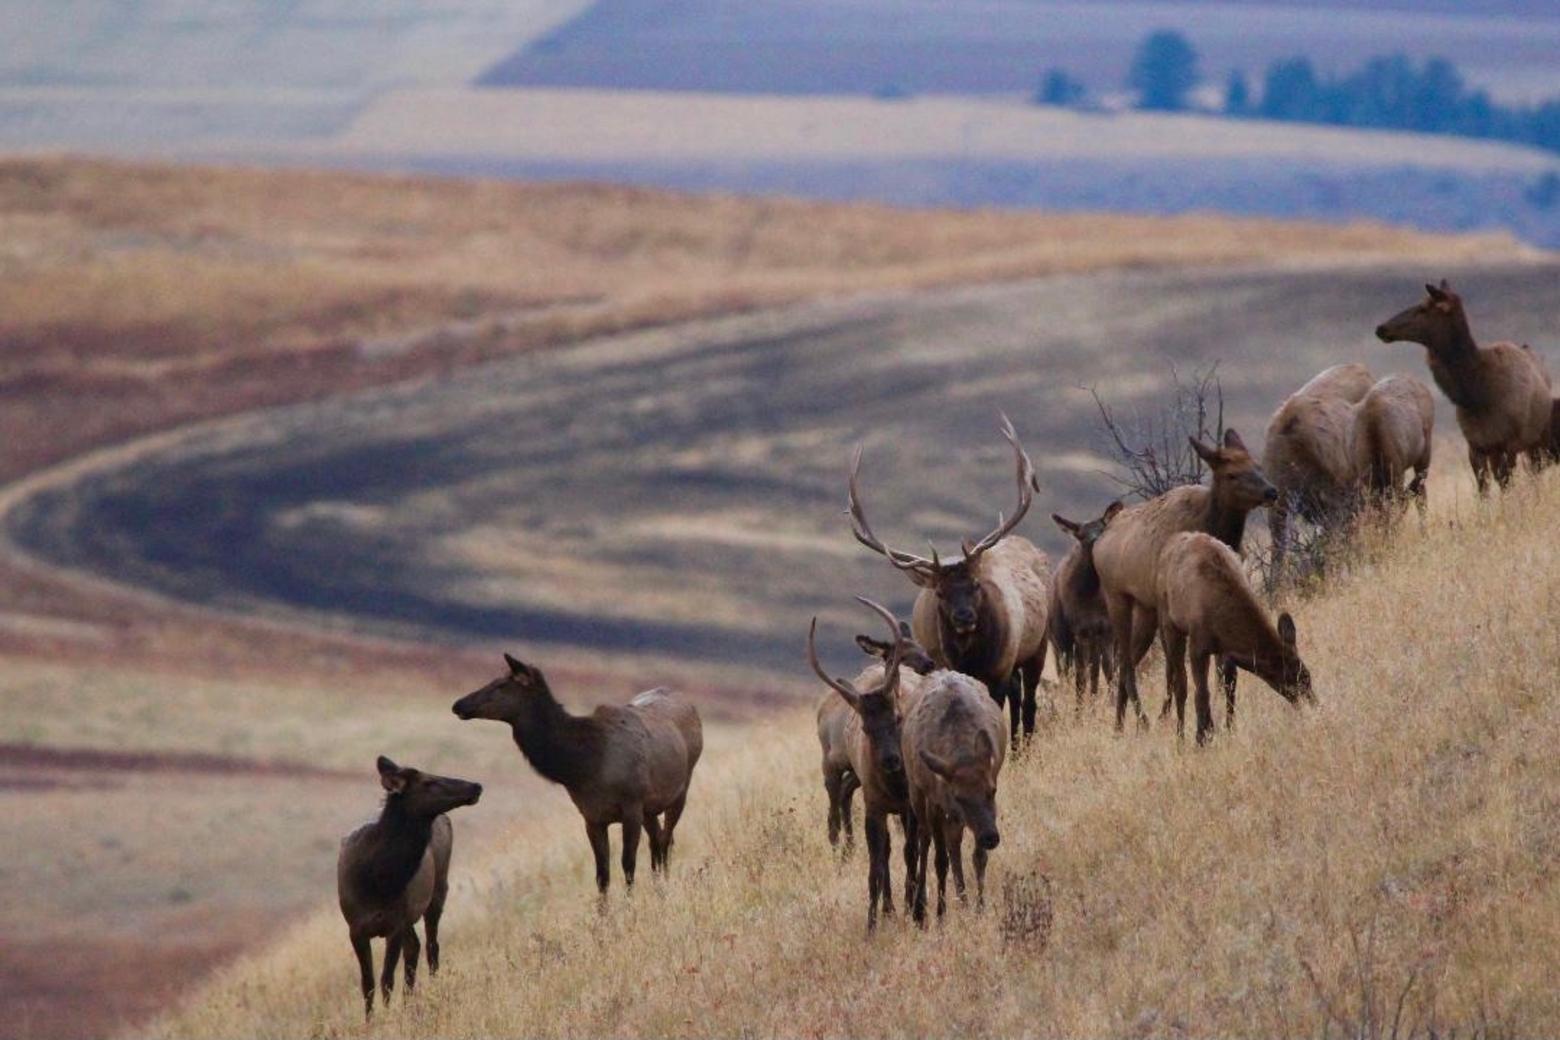 As sprawl fragments the Gallatin Valley what is likely to disappear first from the outskirts of Bozeman: elk or viable ag? In many ways, their fates are intertwined. Photo by Holly Pippel. Click on image to enlarge.